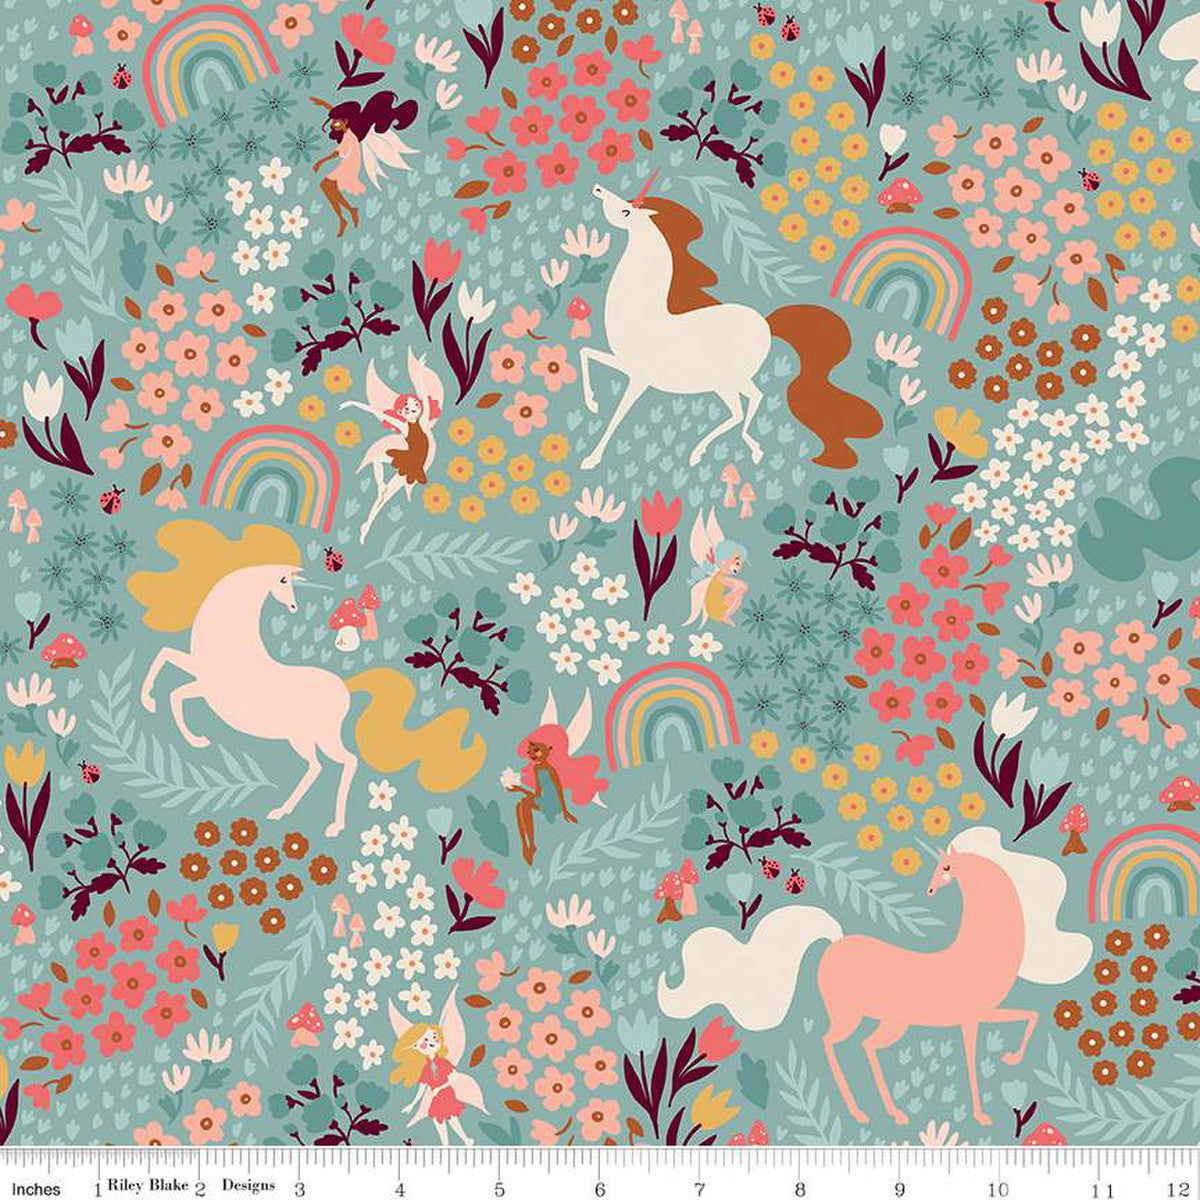 This print features unicorns, rainbows, and fairies in fields of flowers.